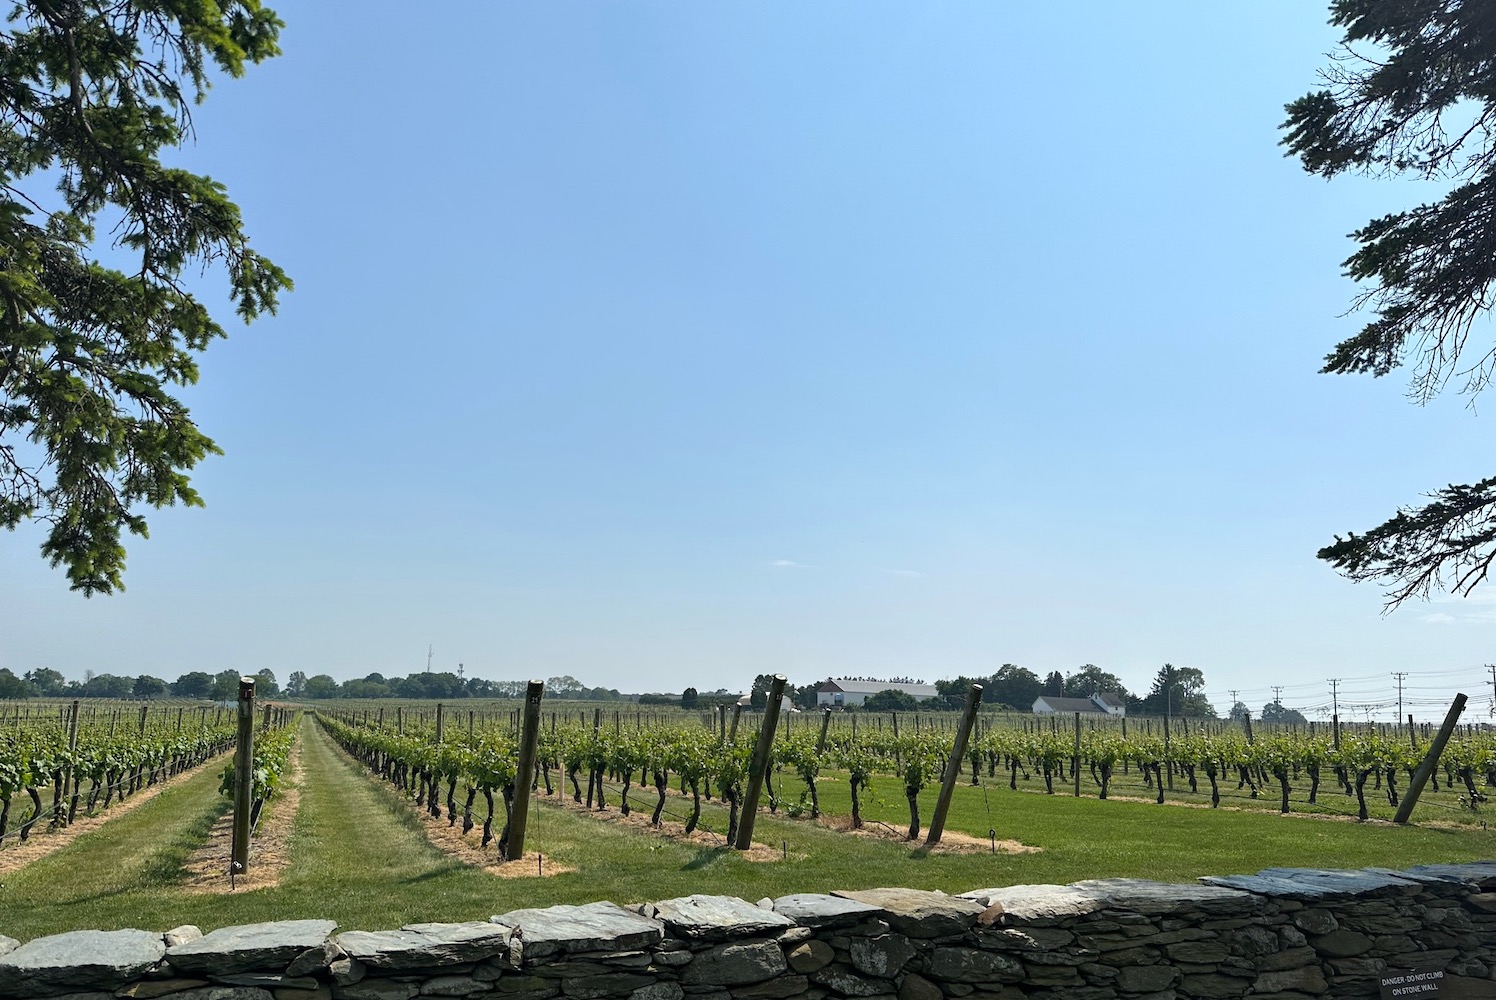 rows of grapevines rhode island